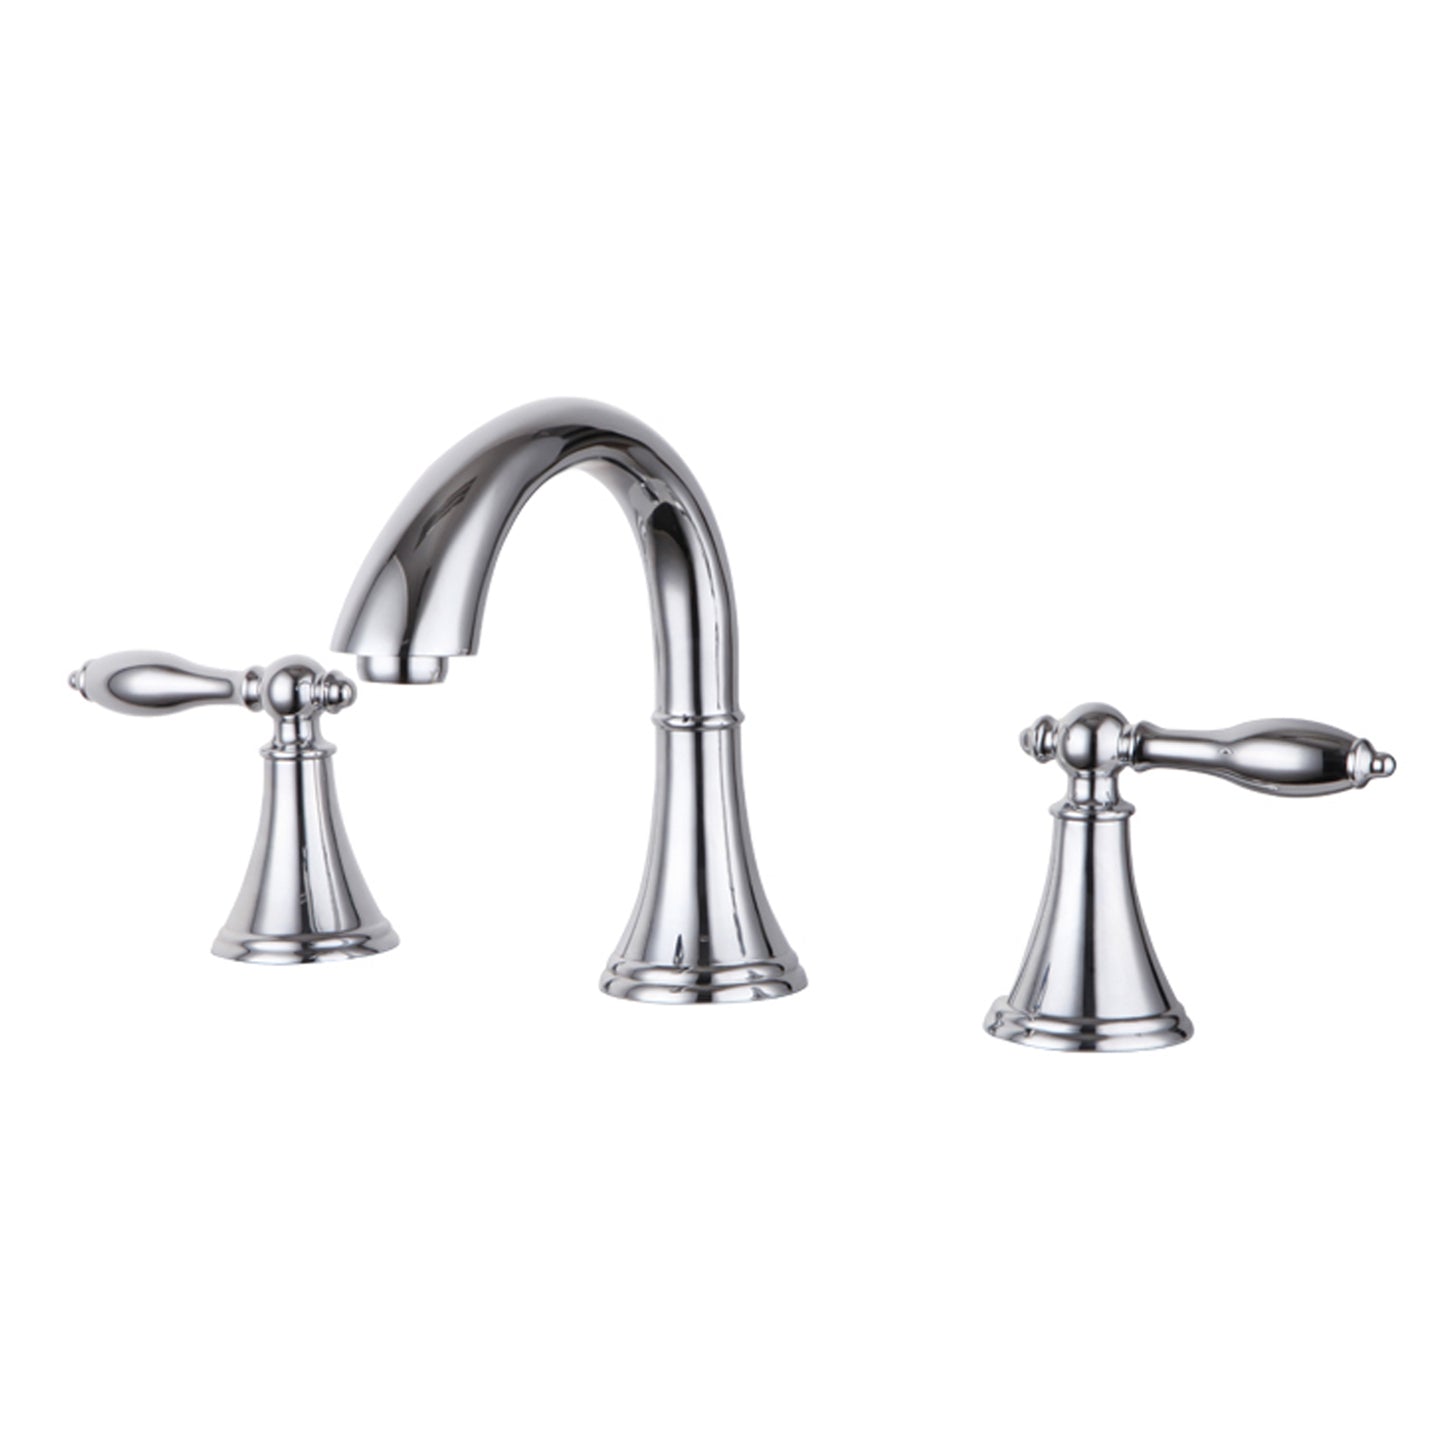 Wide Spread Lavatory Faucet F01 115 01 in Chrome